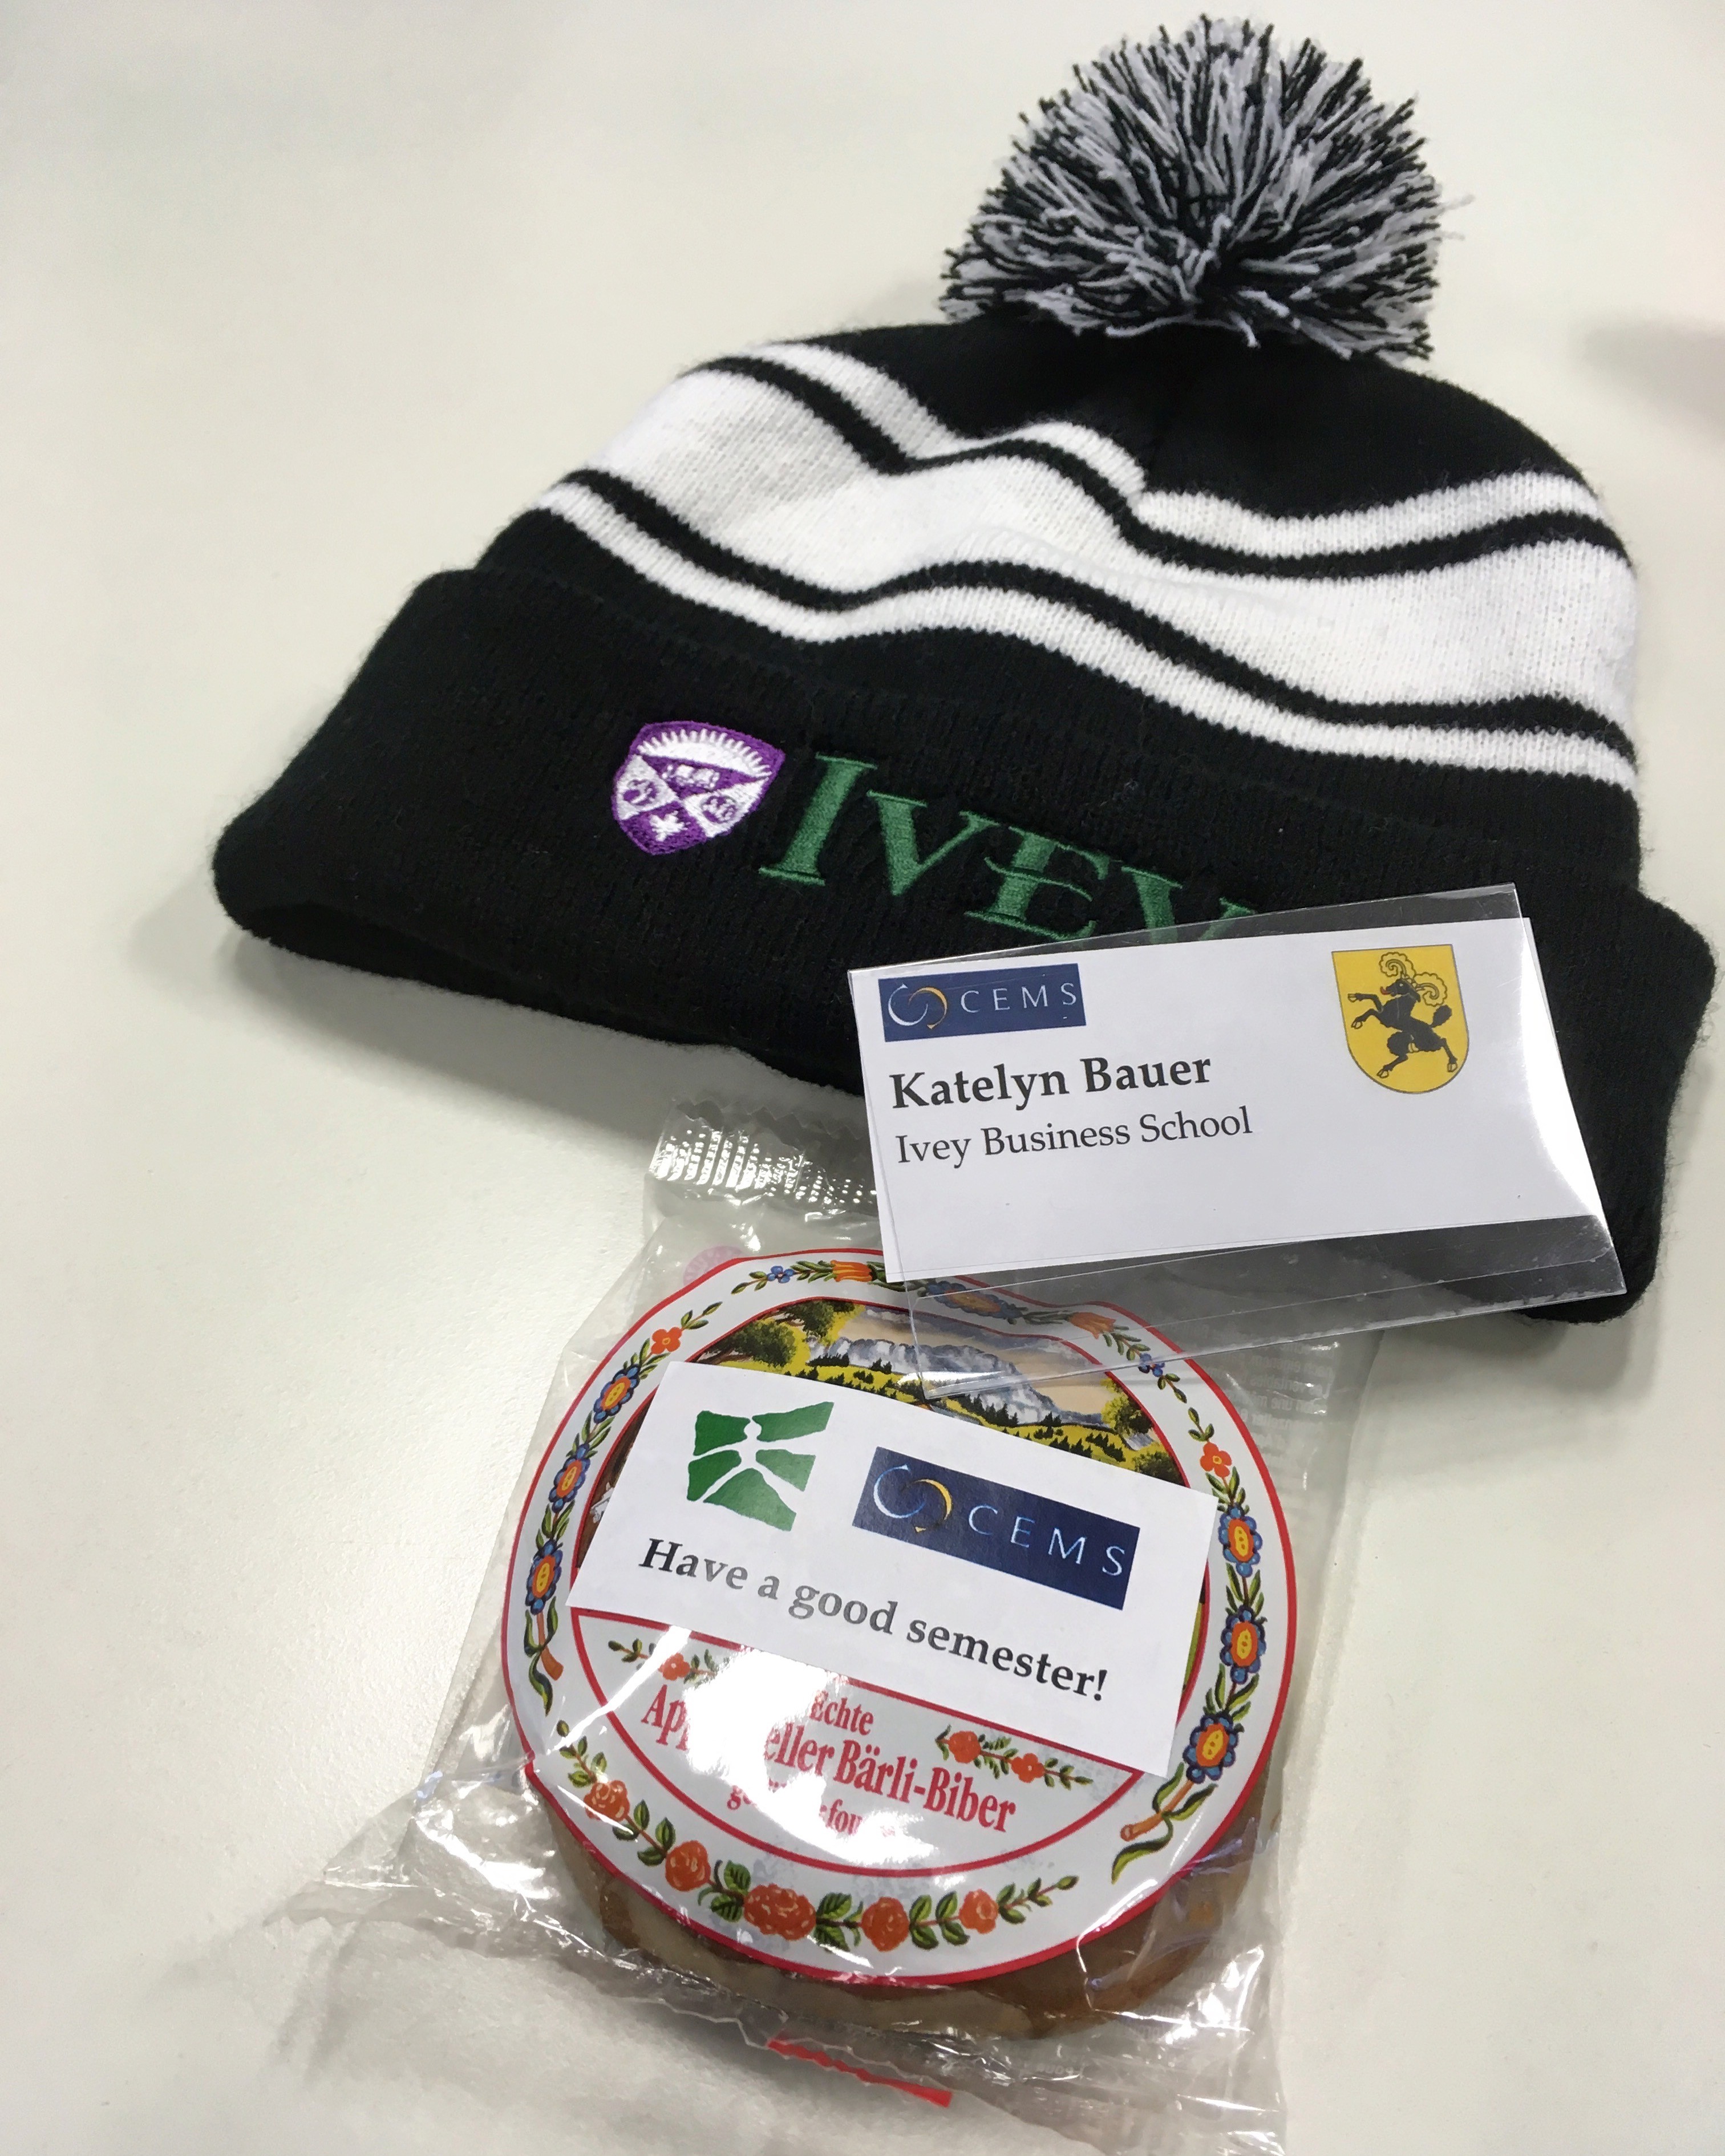 An Ivey touque, treat and Katelyn Bauer nametag